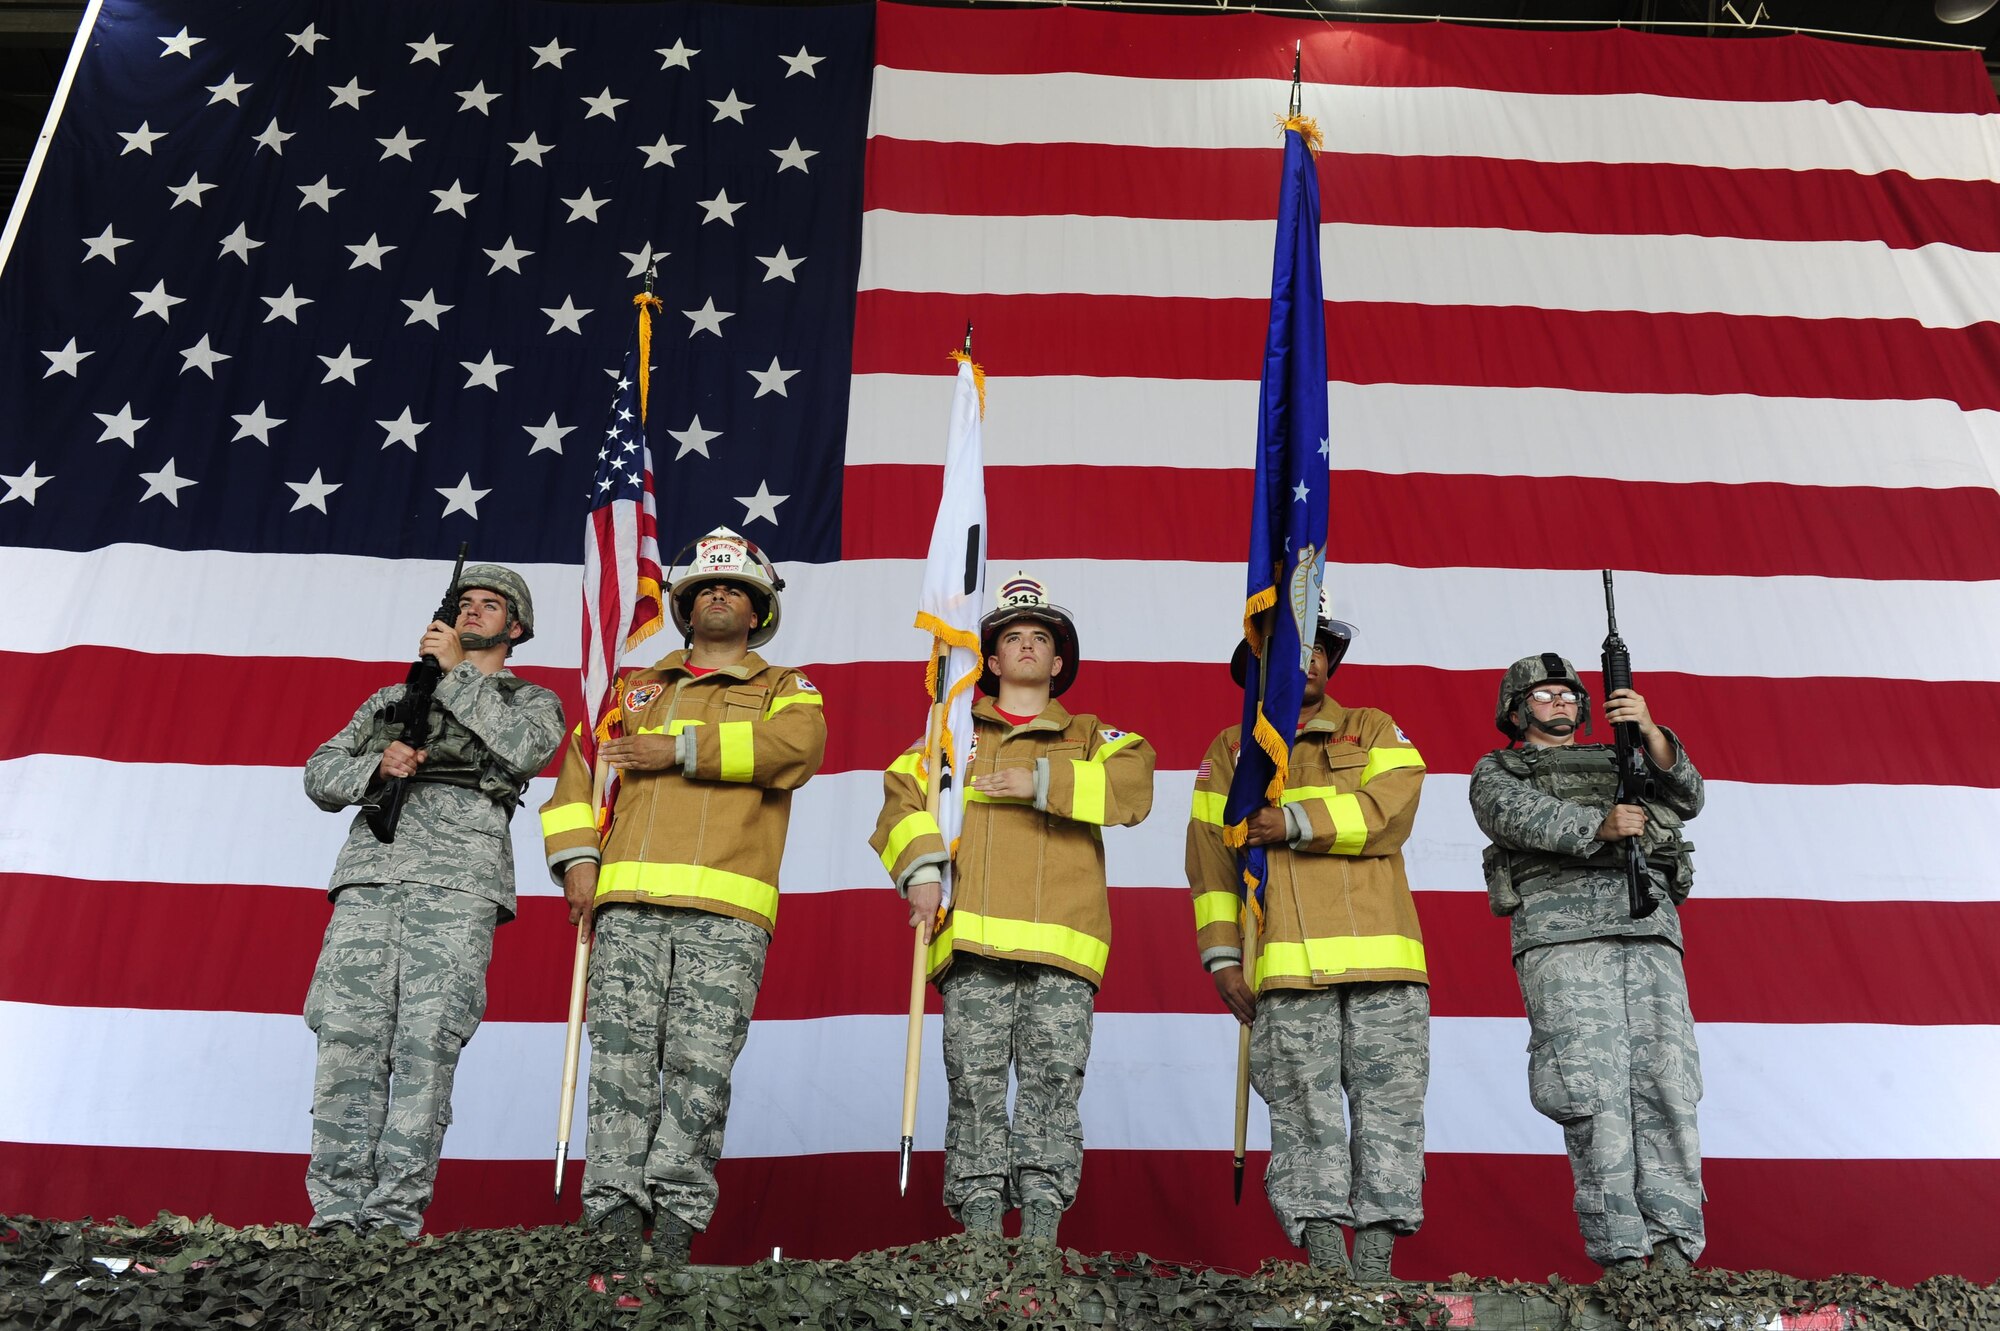 Airmen from the 8th Fighter Wing prepare to post the colors during a 9-11 Remembrance Day Ceremony at Kunsan Air Base, Republic of Korea, Sept. 11, 2015. United States Air Force Airmen and Republic of Korea air force members attended the ceremony to the remember the events that occurred during the terrorist attacks14 years ago. (U.S. Air Force photo by Staff Sgt. Nick Wilson/Released)